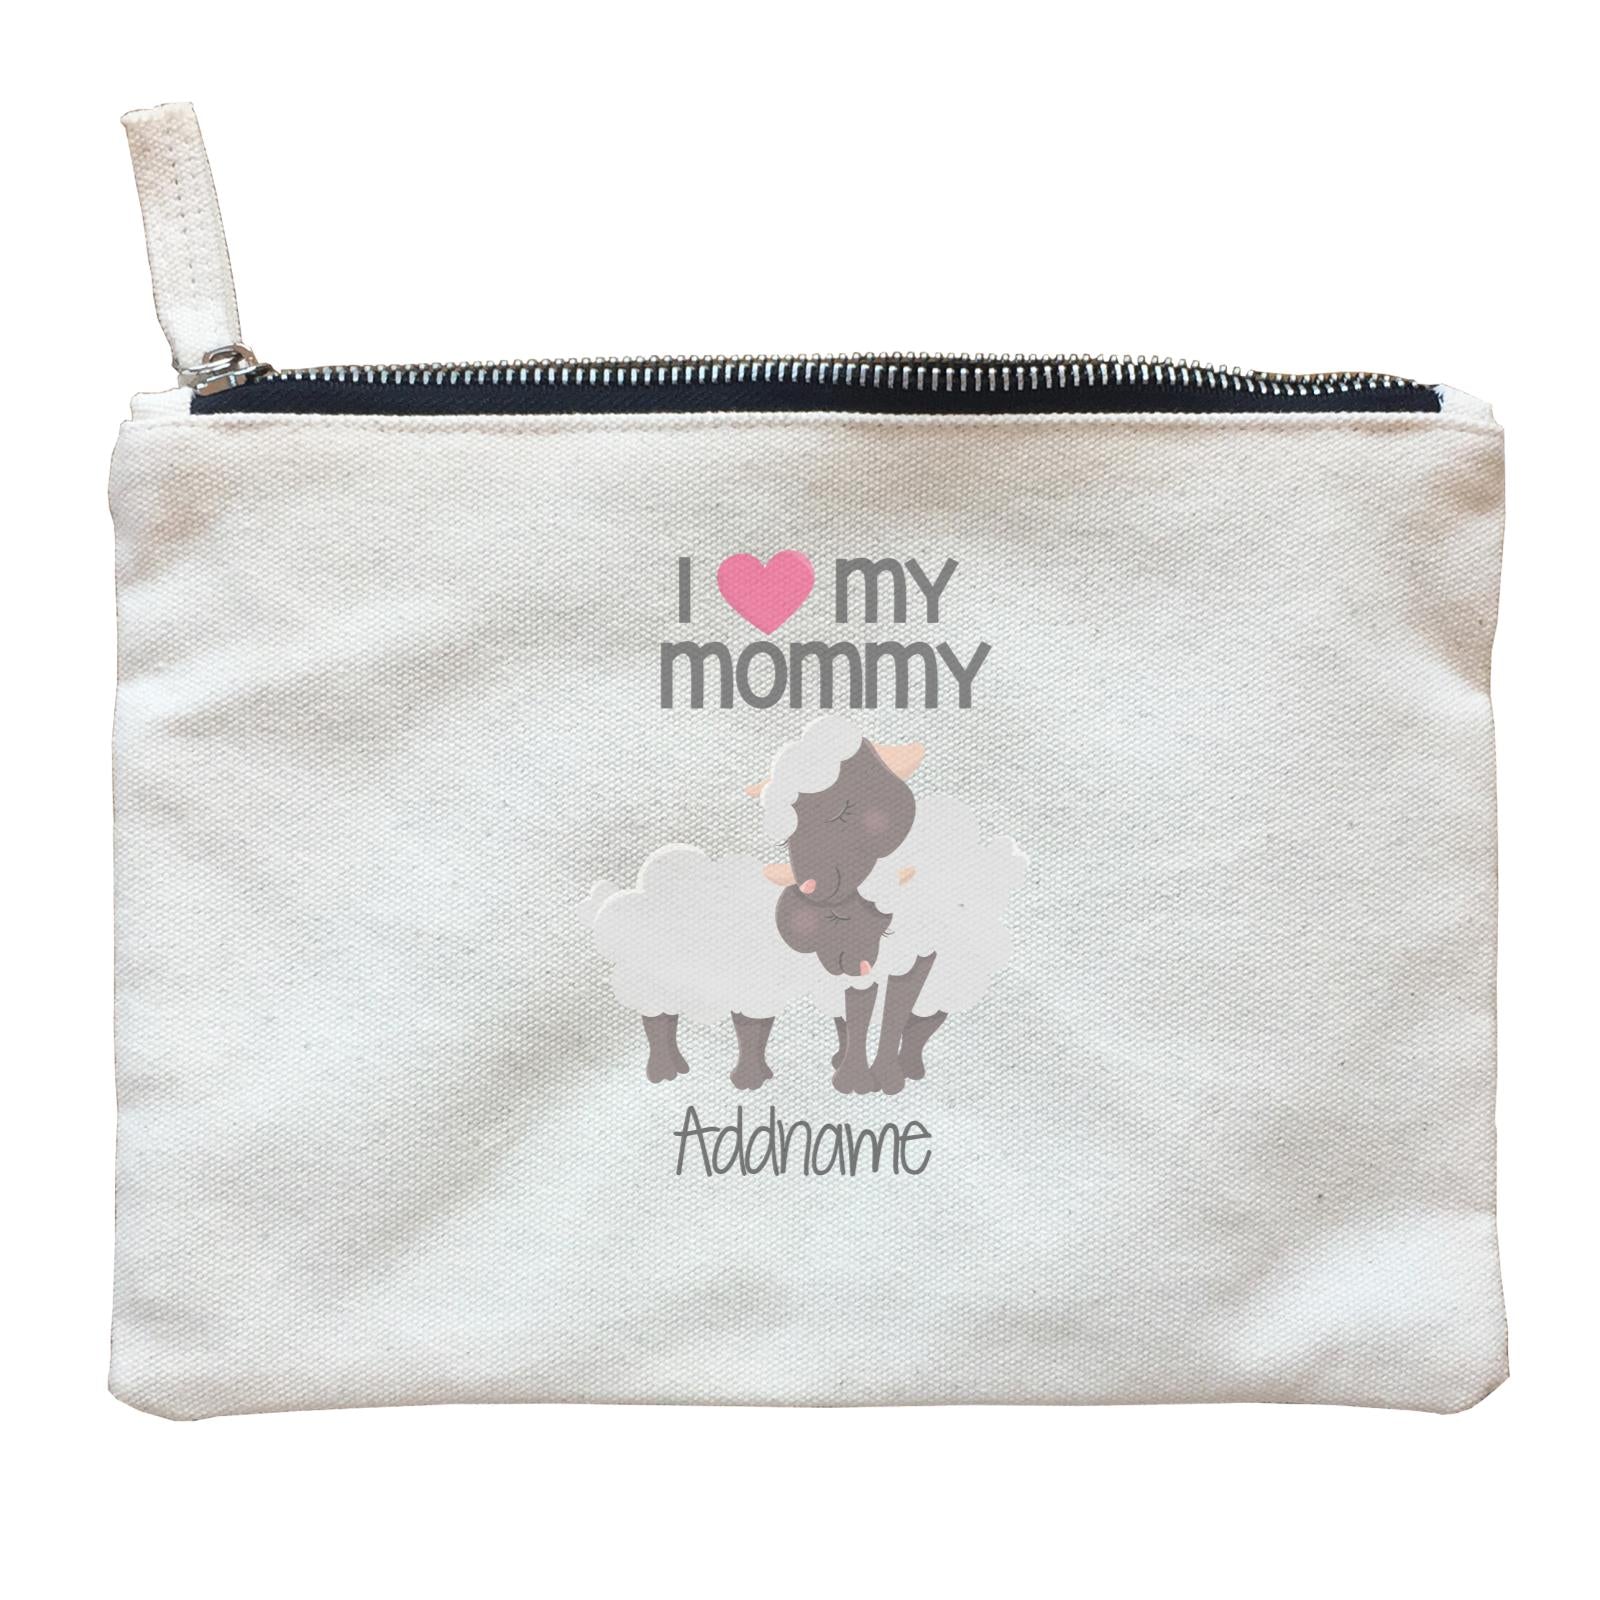 Animal &Loved Ones Sheep I Love My Mommy Addname Zipper Pouch